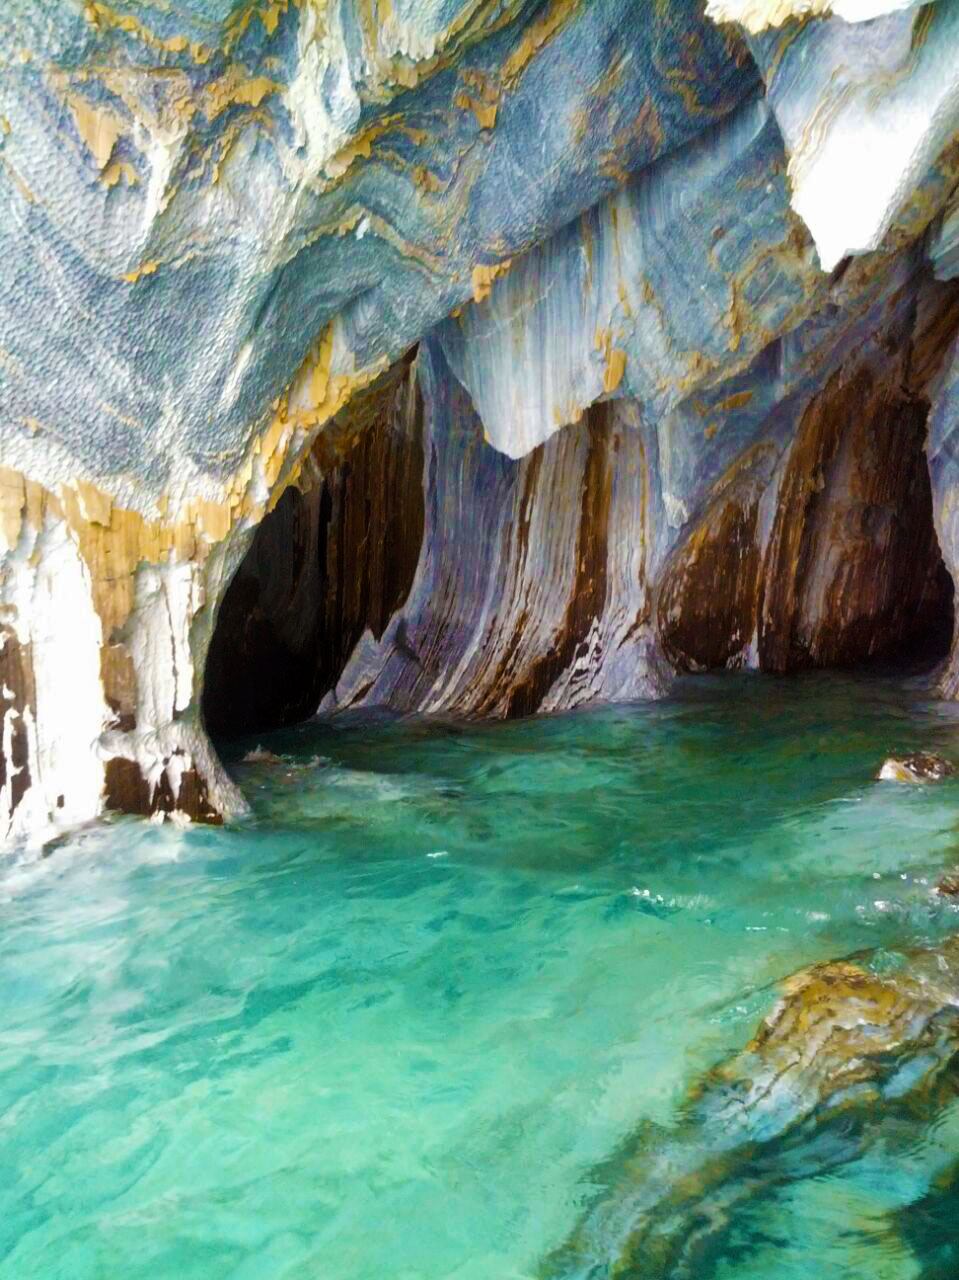 Marble caves clear water Rio Marbol